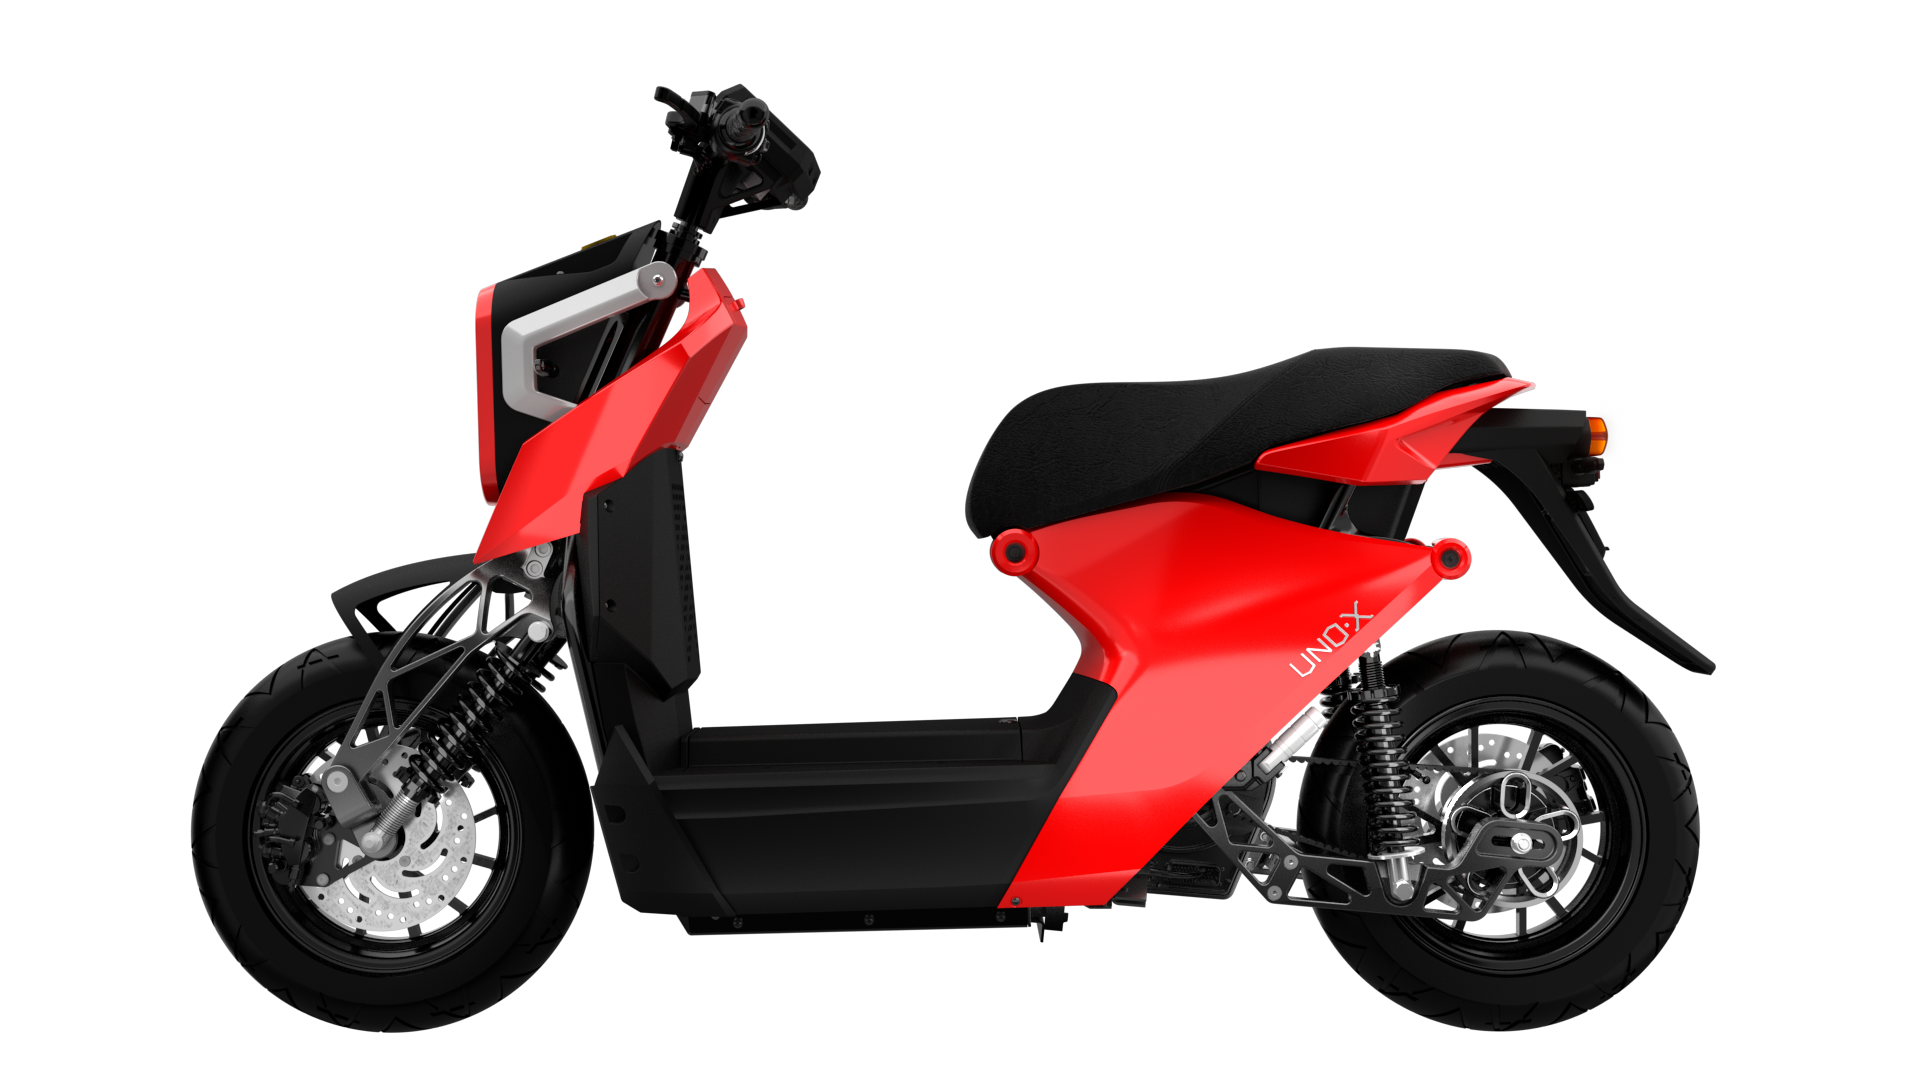 Singapore's GSS Energy acquires Edison Motors Thailand, produce Iso Uno-X electric scooter - paultan.org